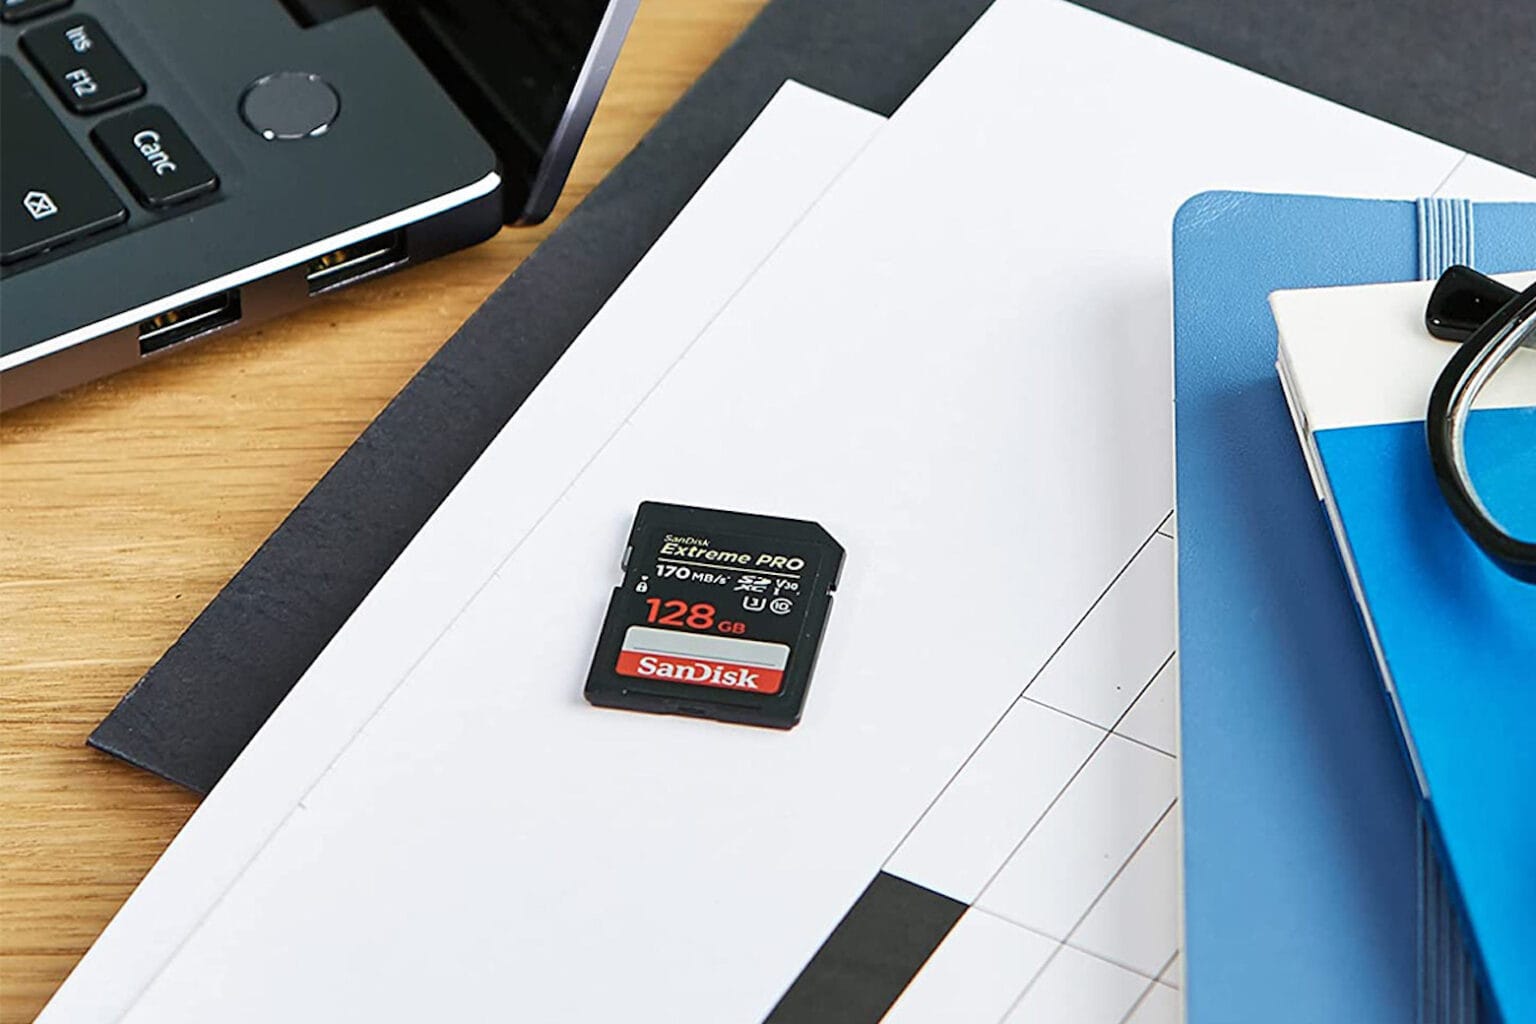 Save 19% off the original price of the SanDisk 128GB SD card while supplies last.